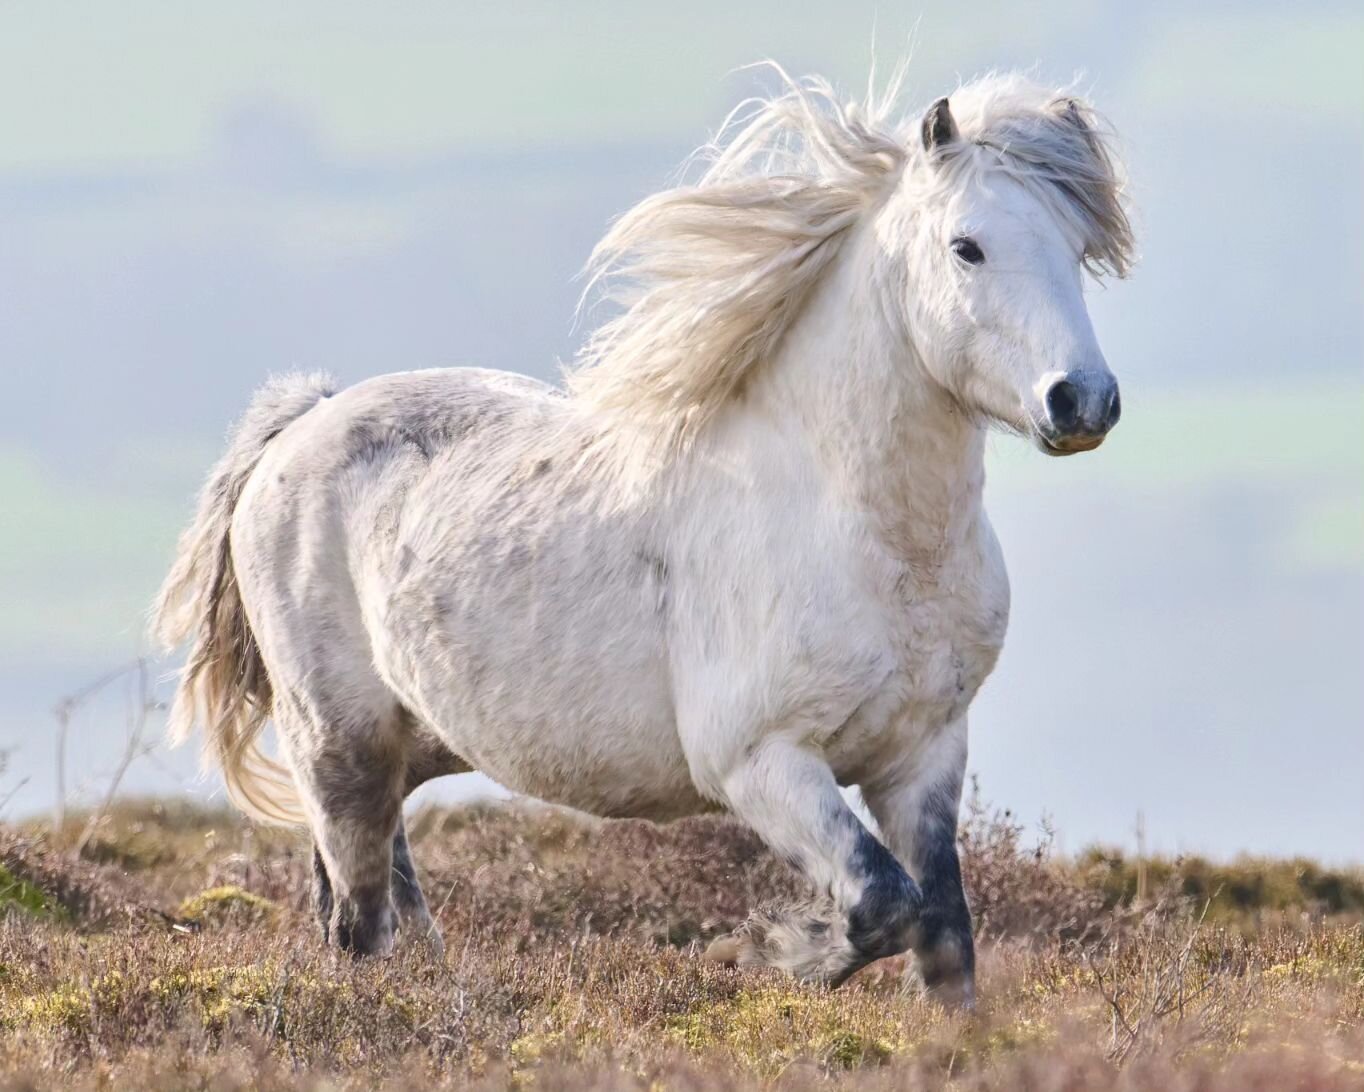 A few moments earlier this pony had just kicked an interested male in the face as he made his advance. This is her galloping away, having successfully protected her chastity.
=======================
Long Mynd, Shropshire, UK
=======================
@